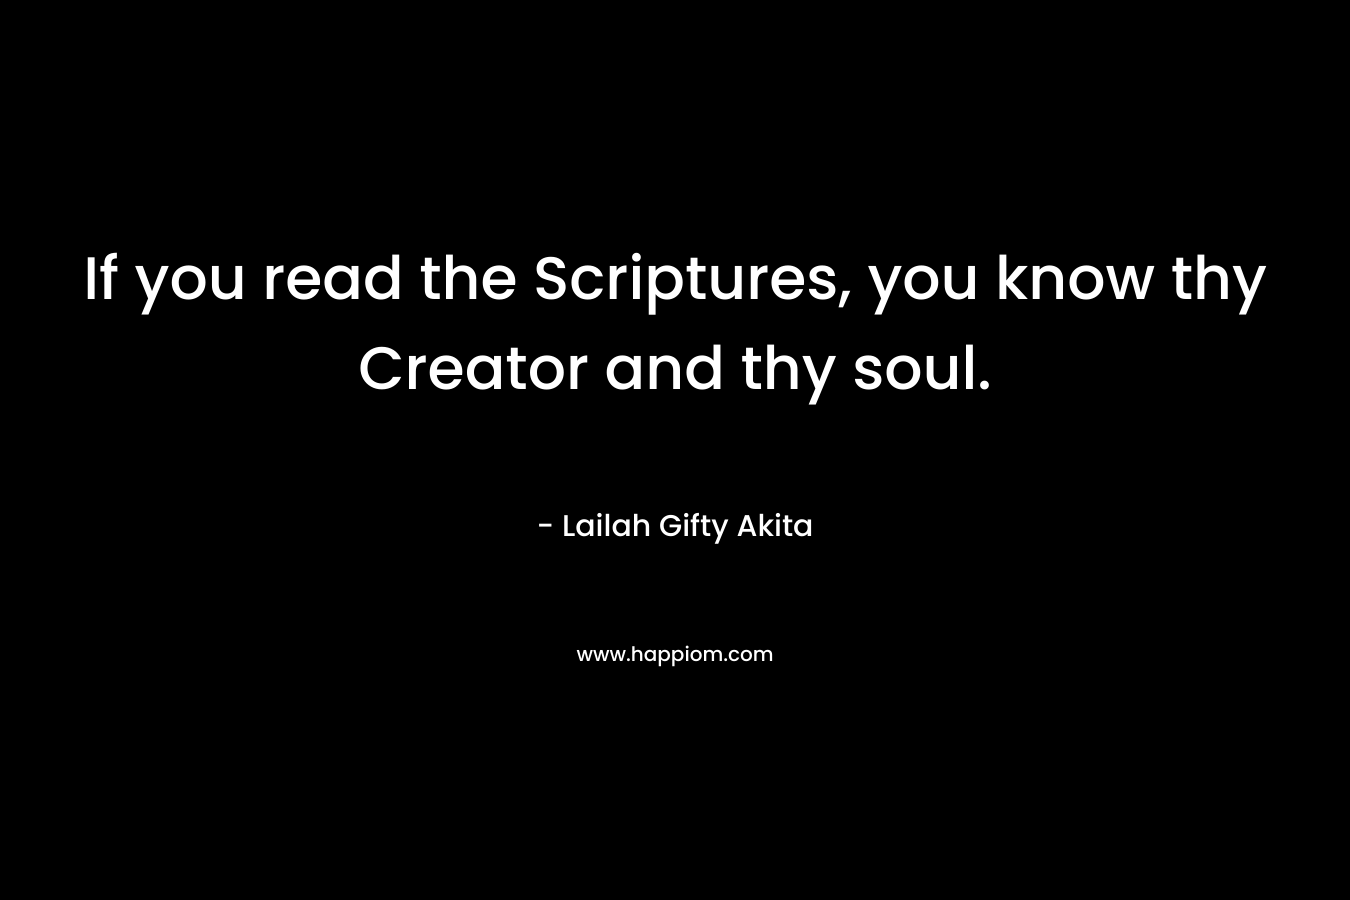 If you read the Scriptures, you know thy Creator and thy soul.